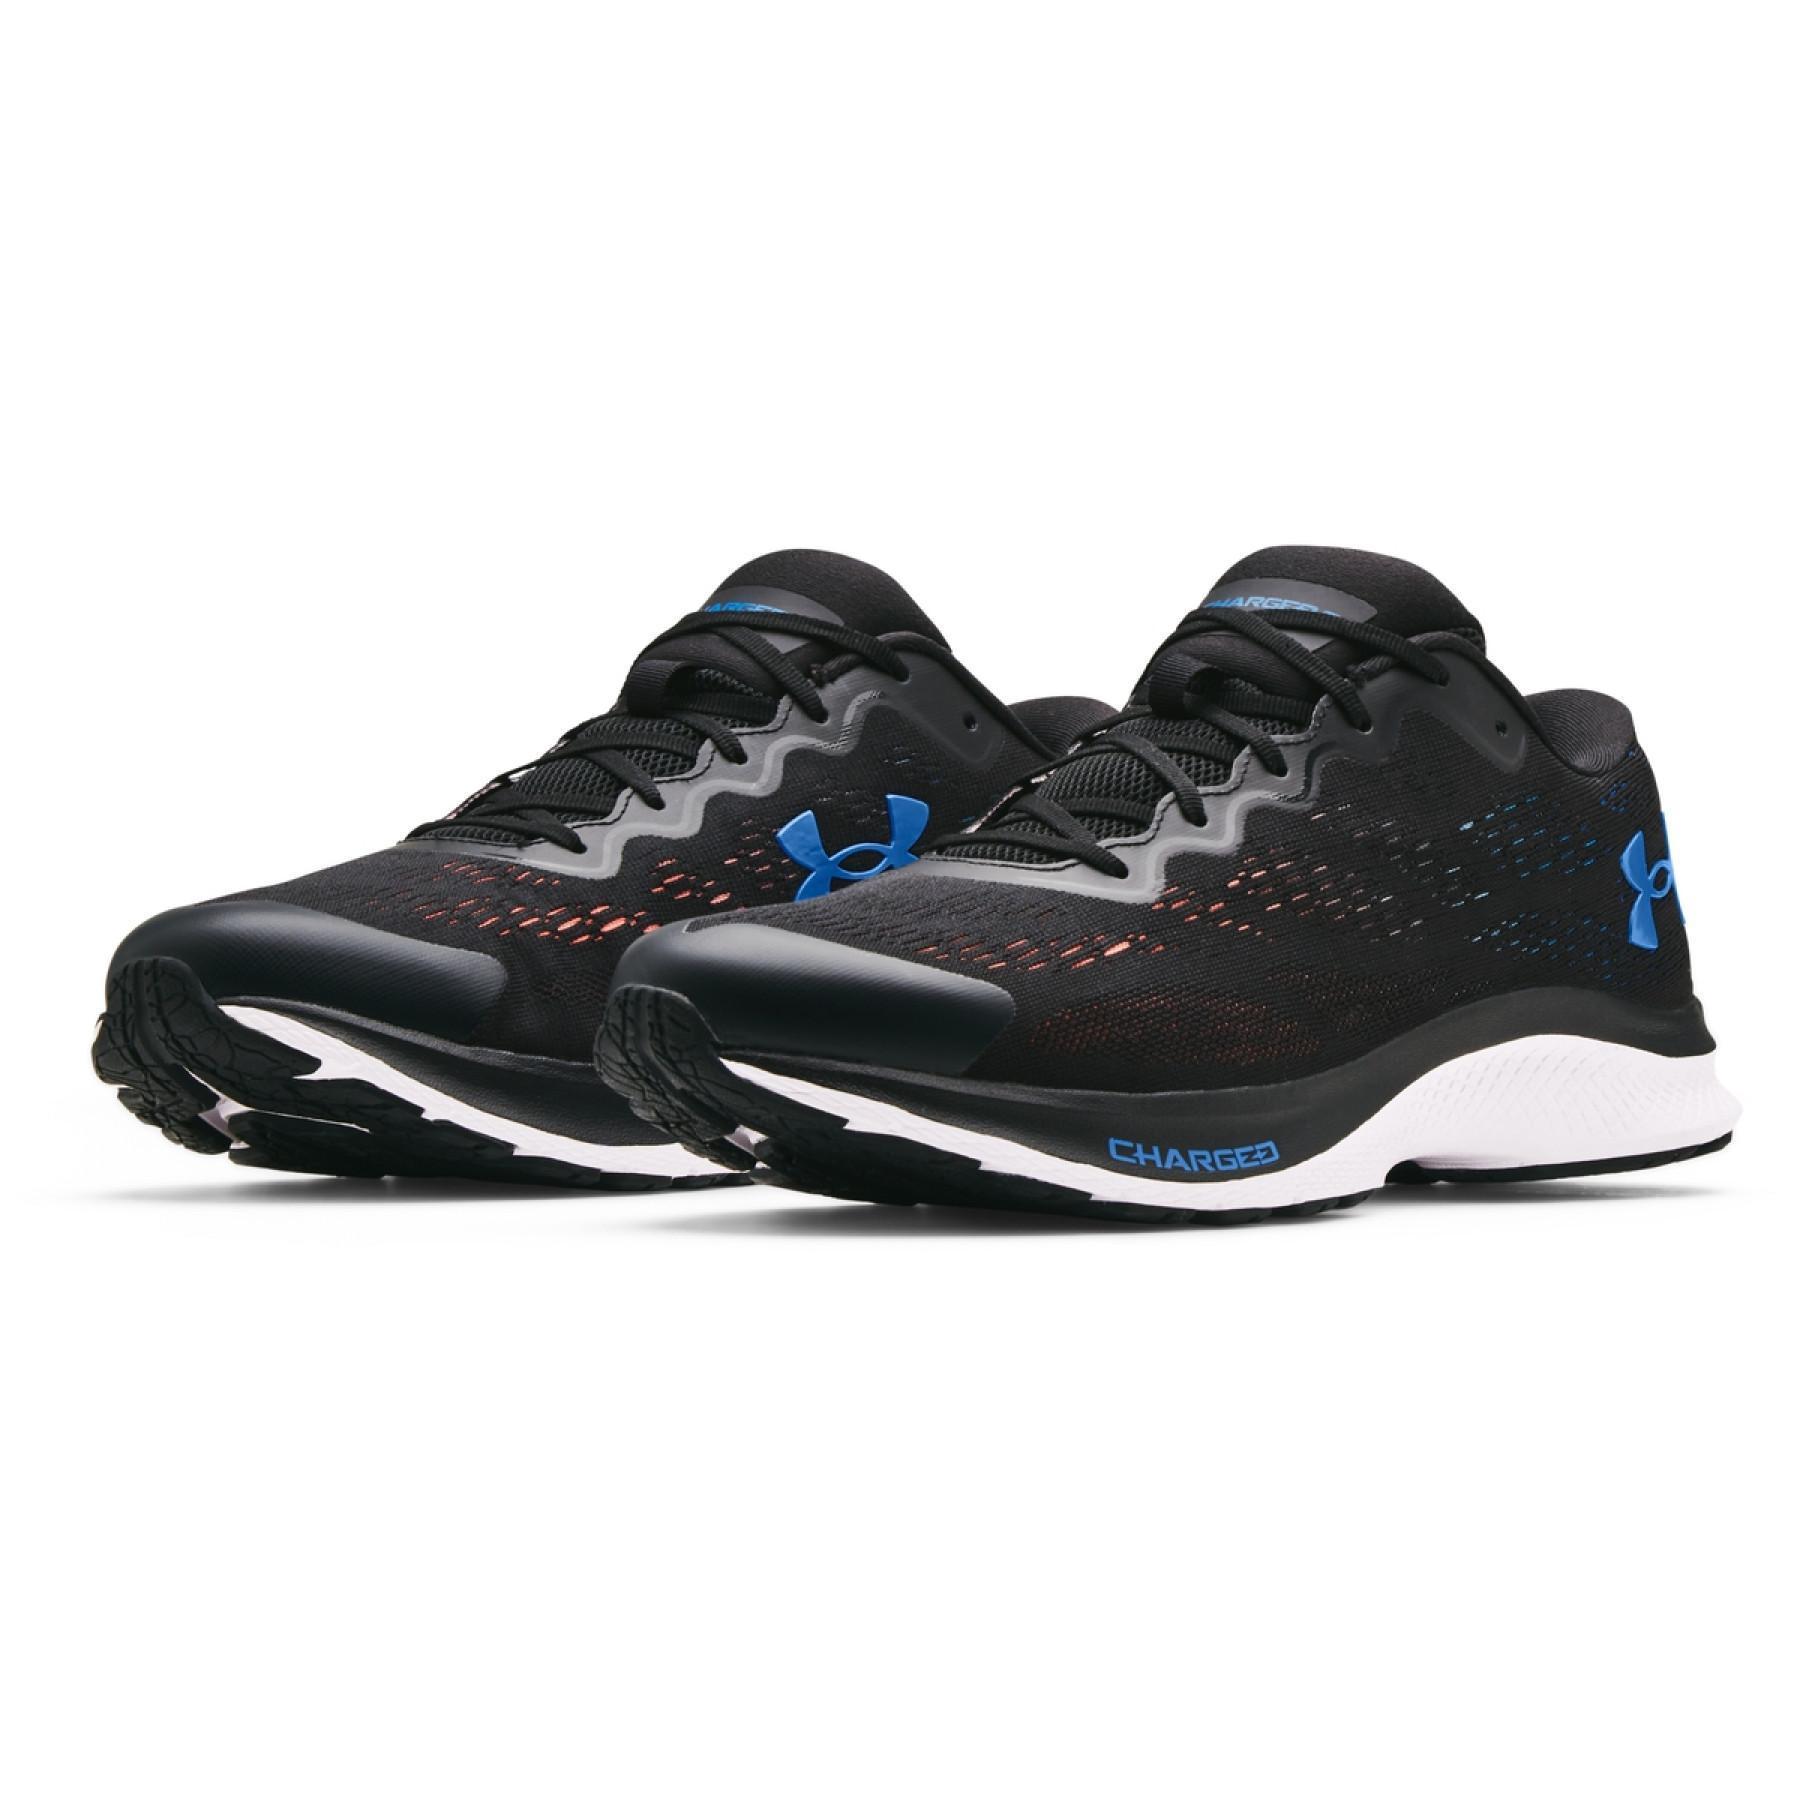 Laufschuhe Under Armour Charged Bandit 6